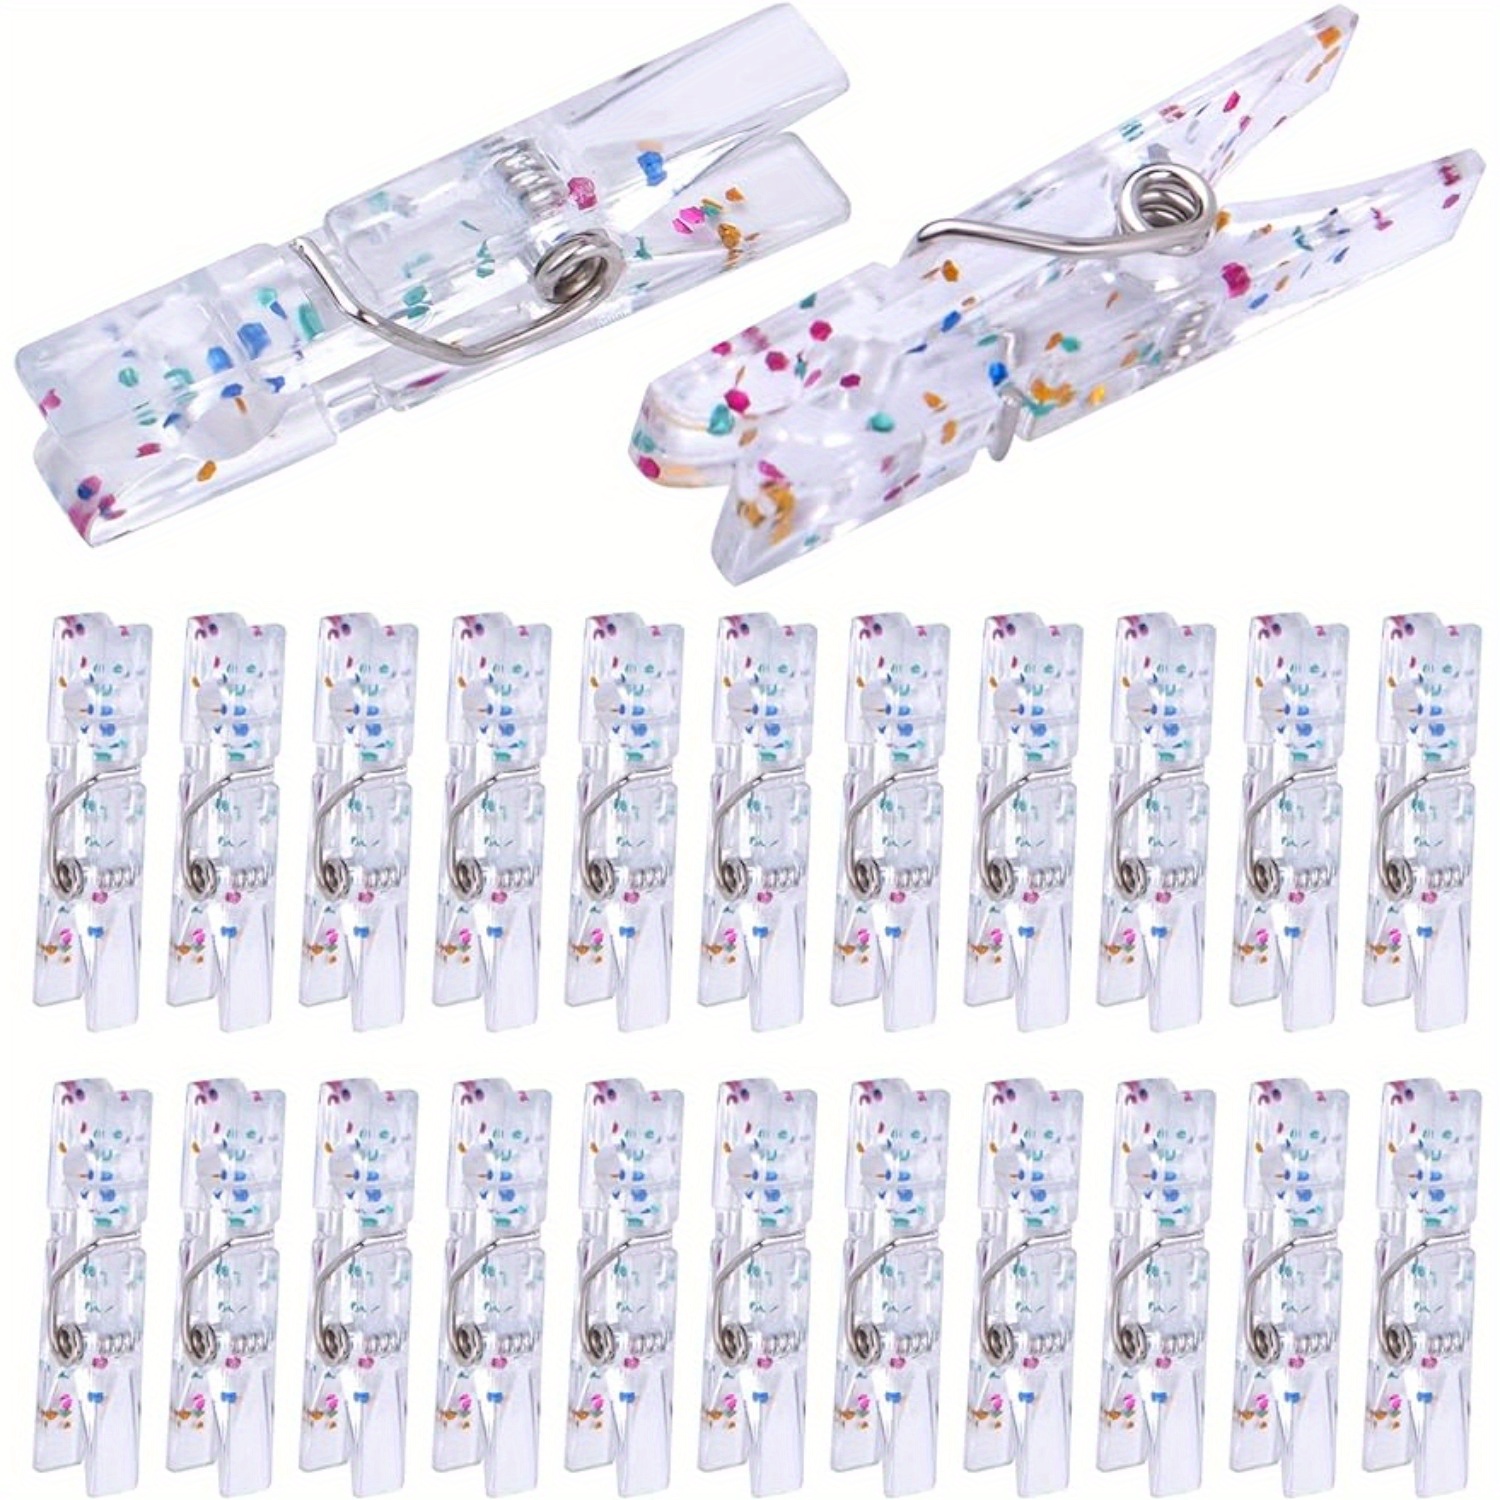 

100pcs Transparent Plastic Clothespins Glittering Photo Paper Utility Clips For Crafts Party Christmas Ornament Home Laundry Tool, Practical Convenient Daily Essential Supplies